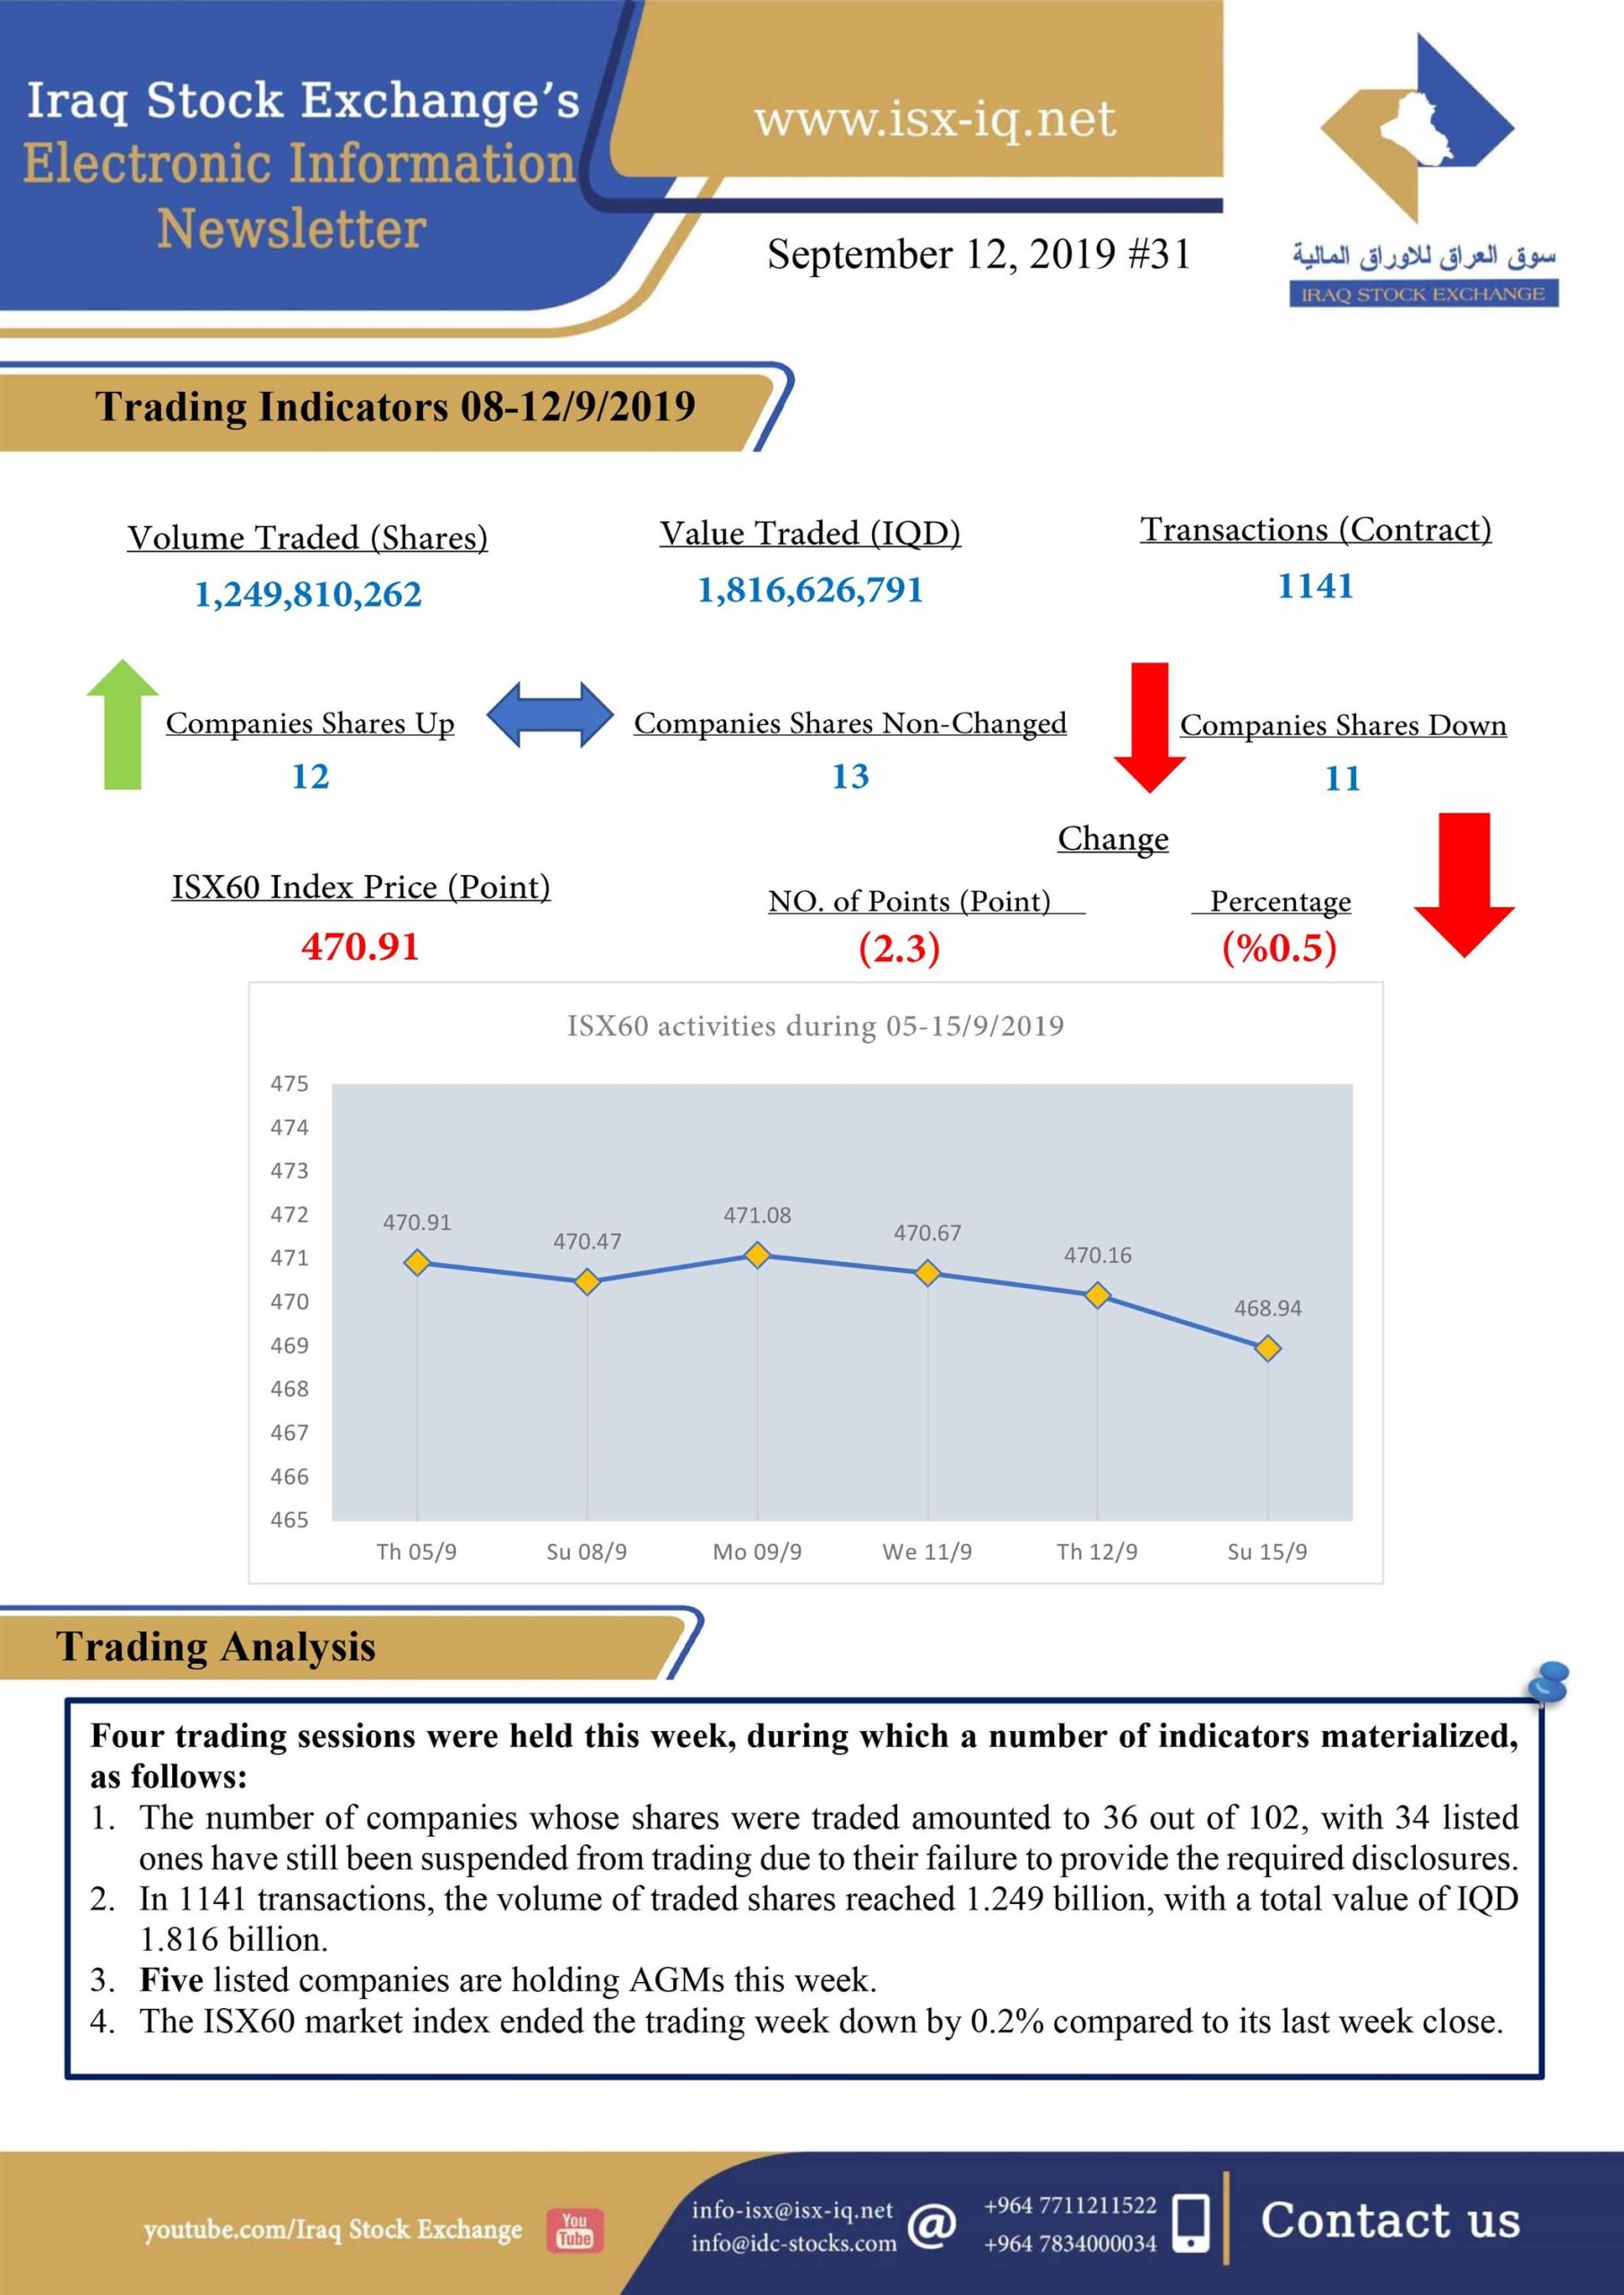 You are currently viewing Issue number 31 of (Iraq Stock Exchange’s Electronic Information weekly Newsletter)